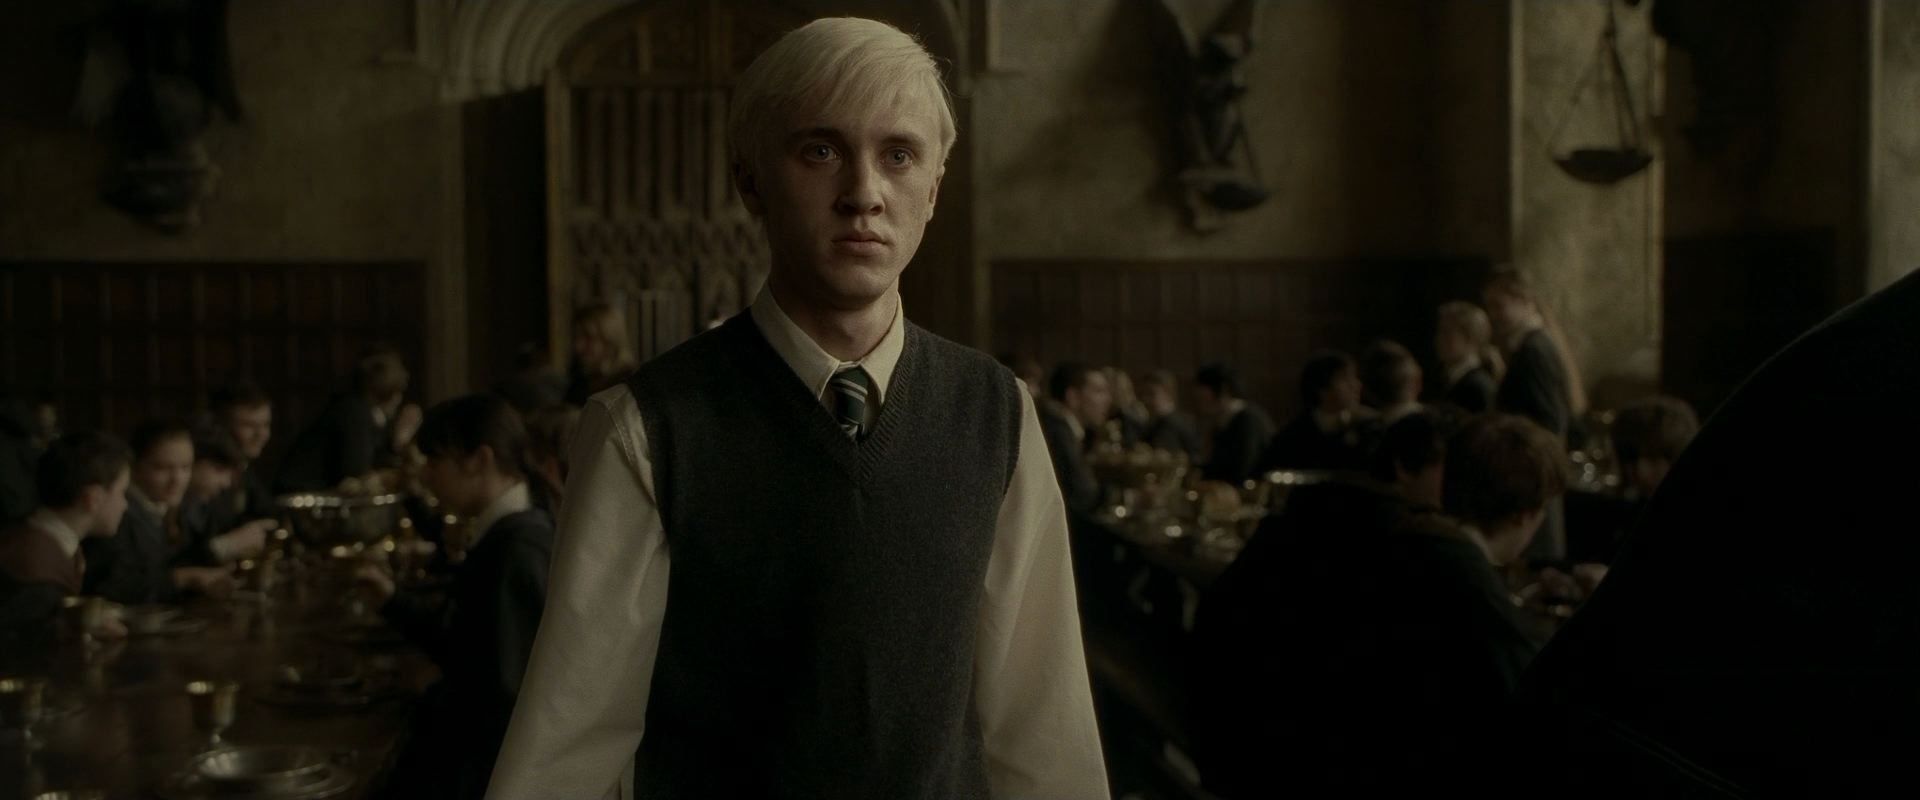 Free download Draco Malfoy Draco Malfoy Wallpaper 1920x800 259665 [1920x800] for your Desktop, Mobile & Tablet. Explore Draco Background. Draco Background